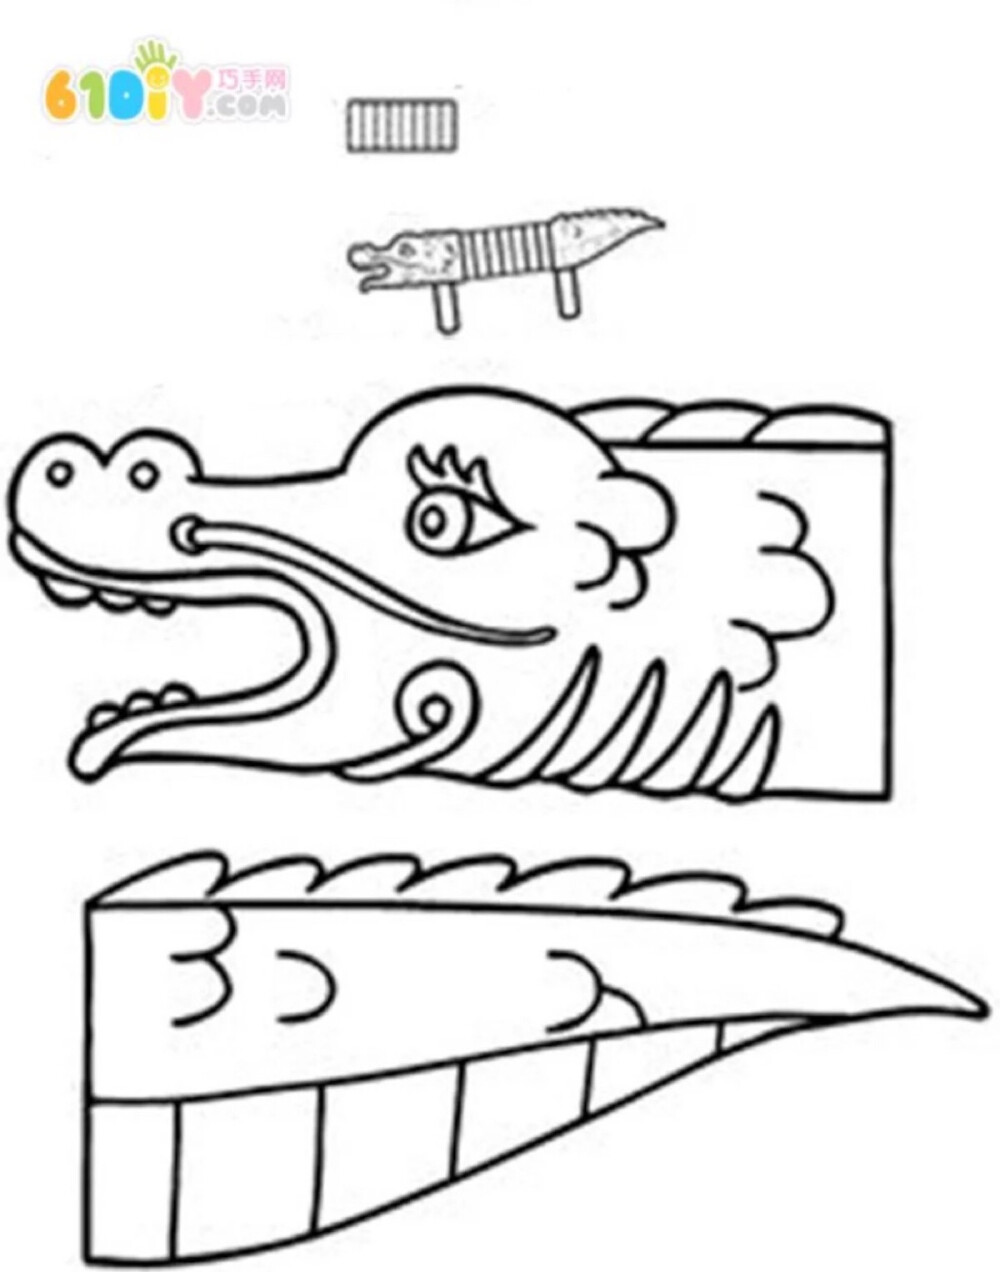 Free Printable Chinese Dragon Craft Template